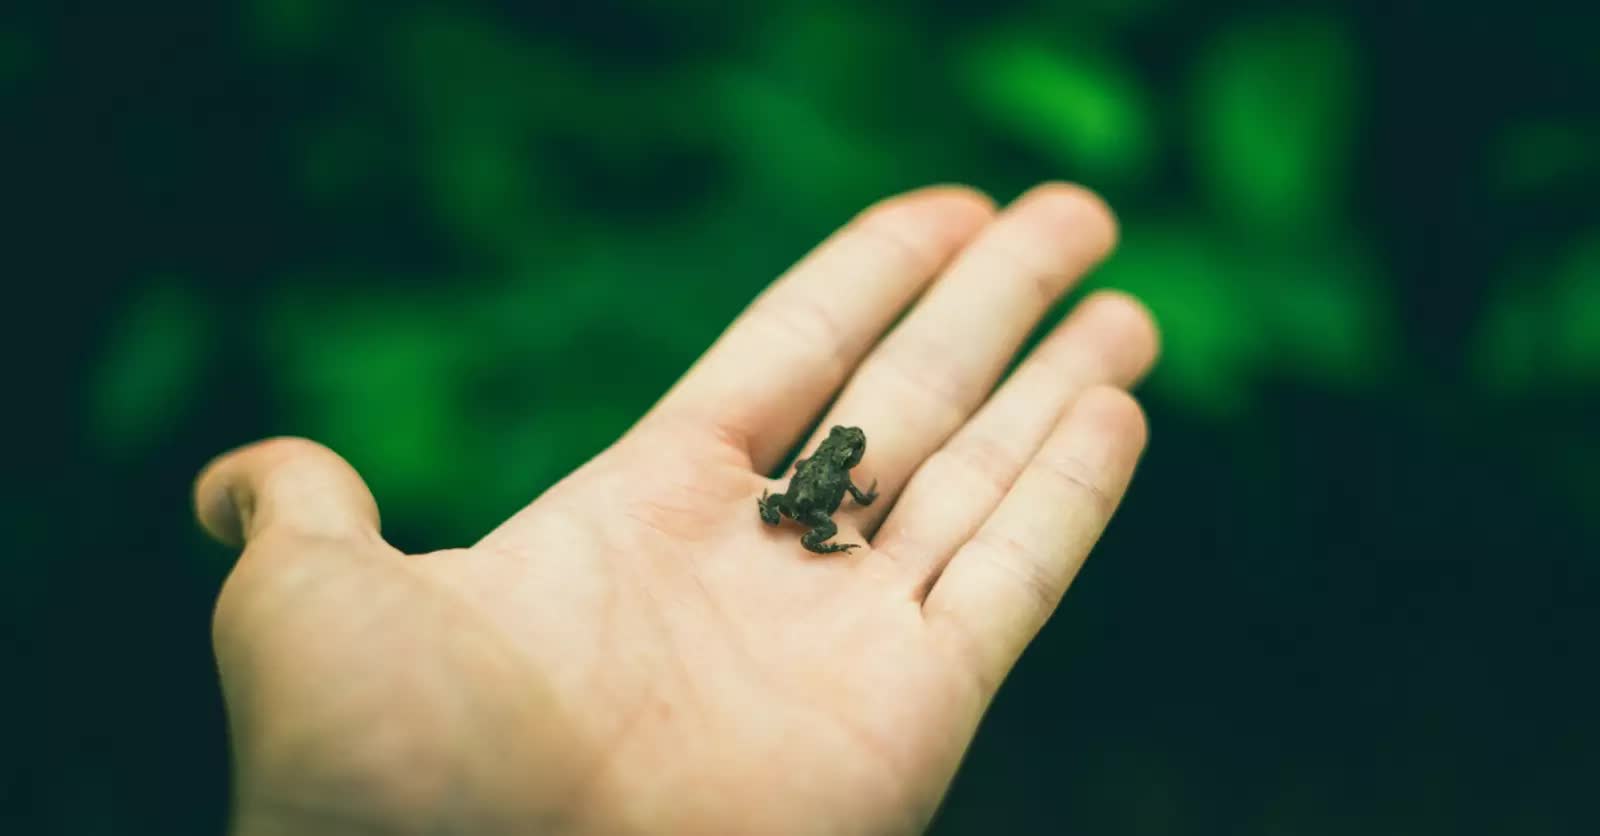 Tiny frog sitting in a person's hand